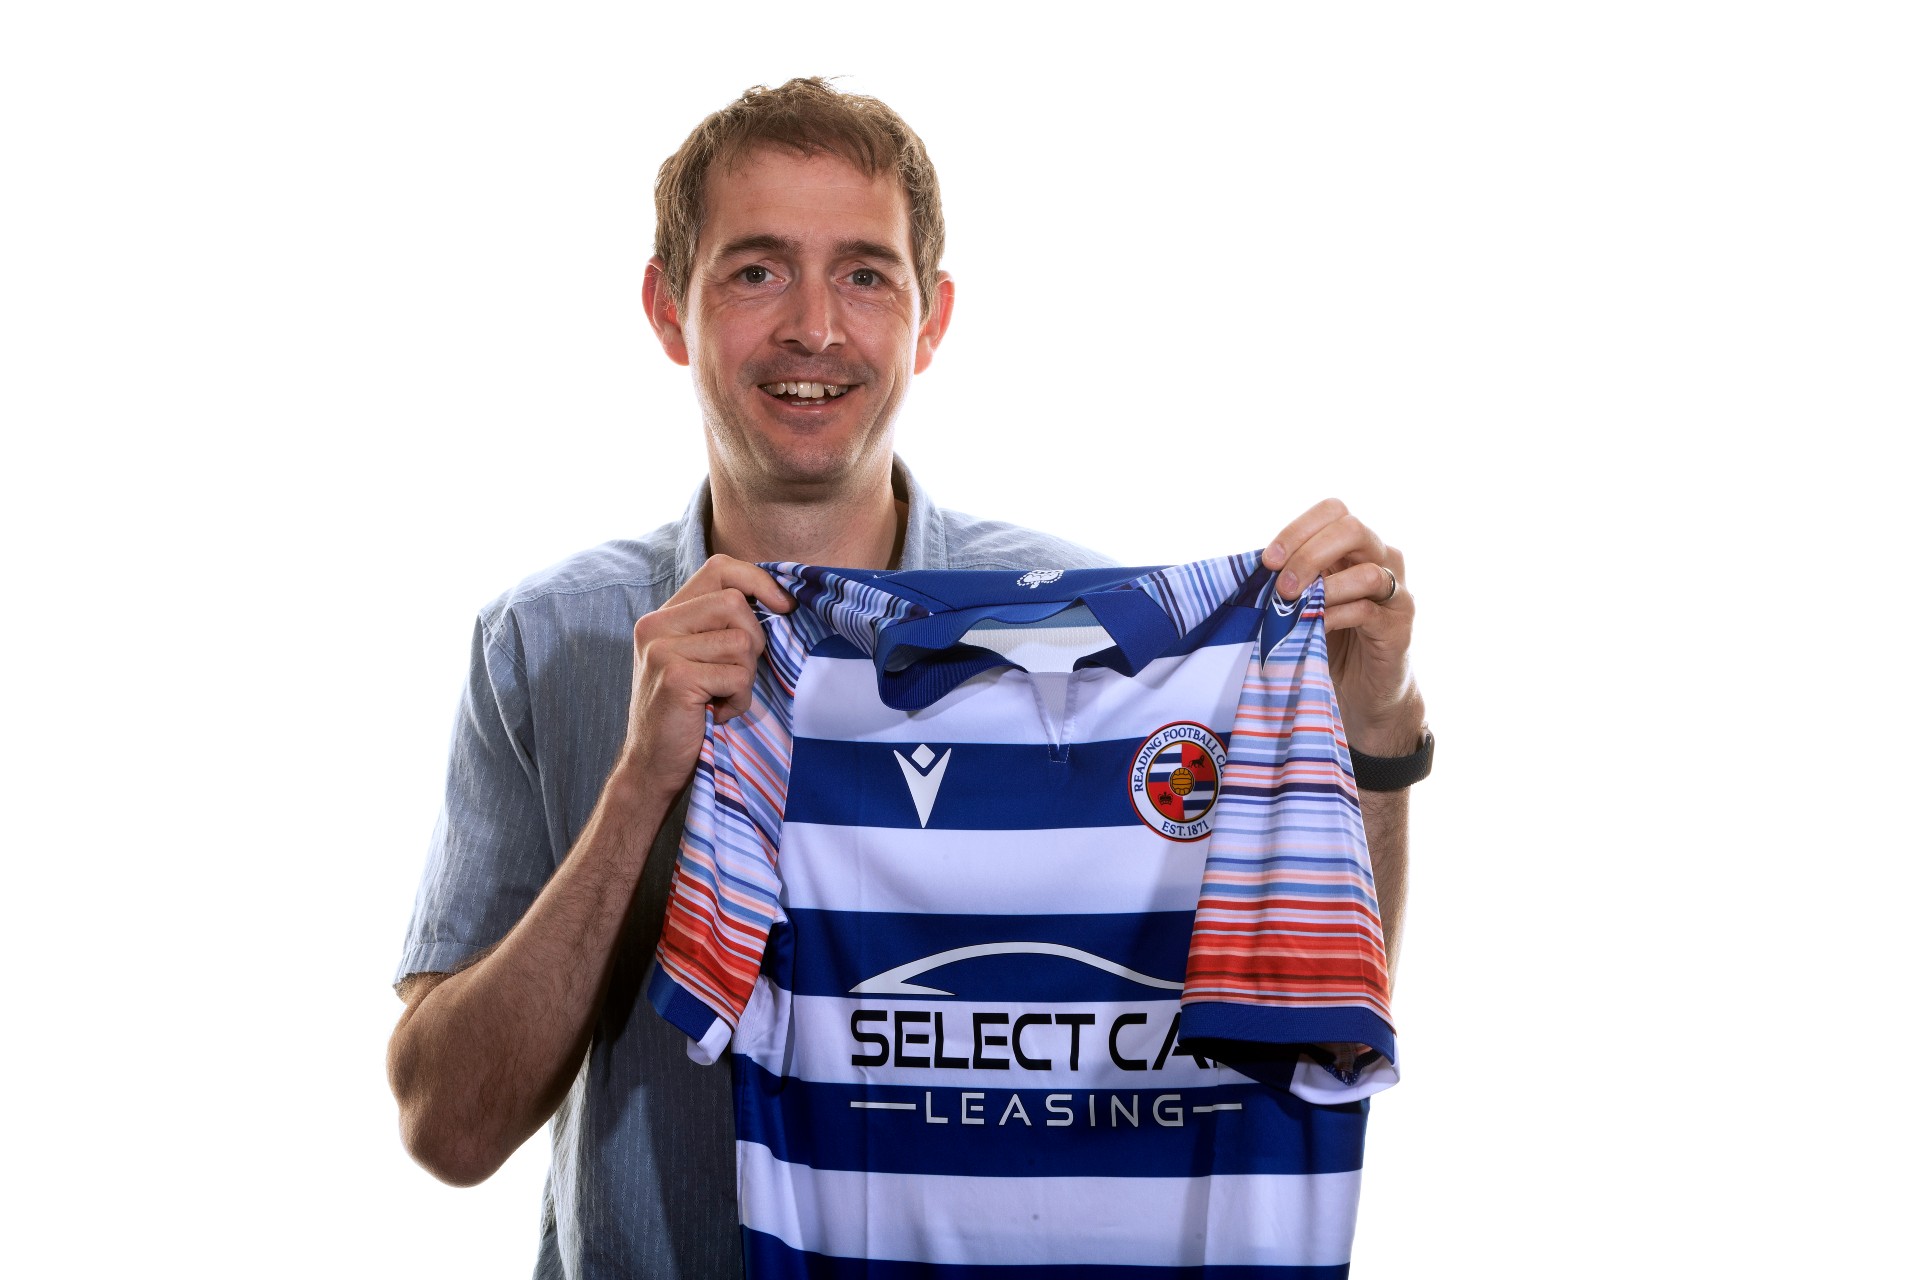 Professor Ed Hawkins holding the new Reading FC 2022/23 season home shirt, which features the climate stripes he designed